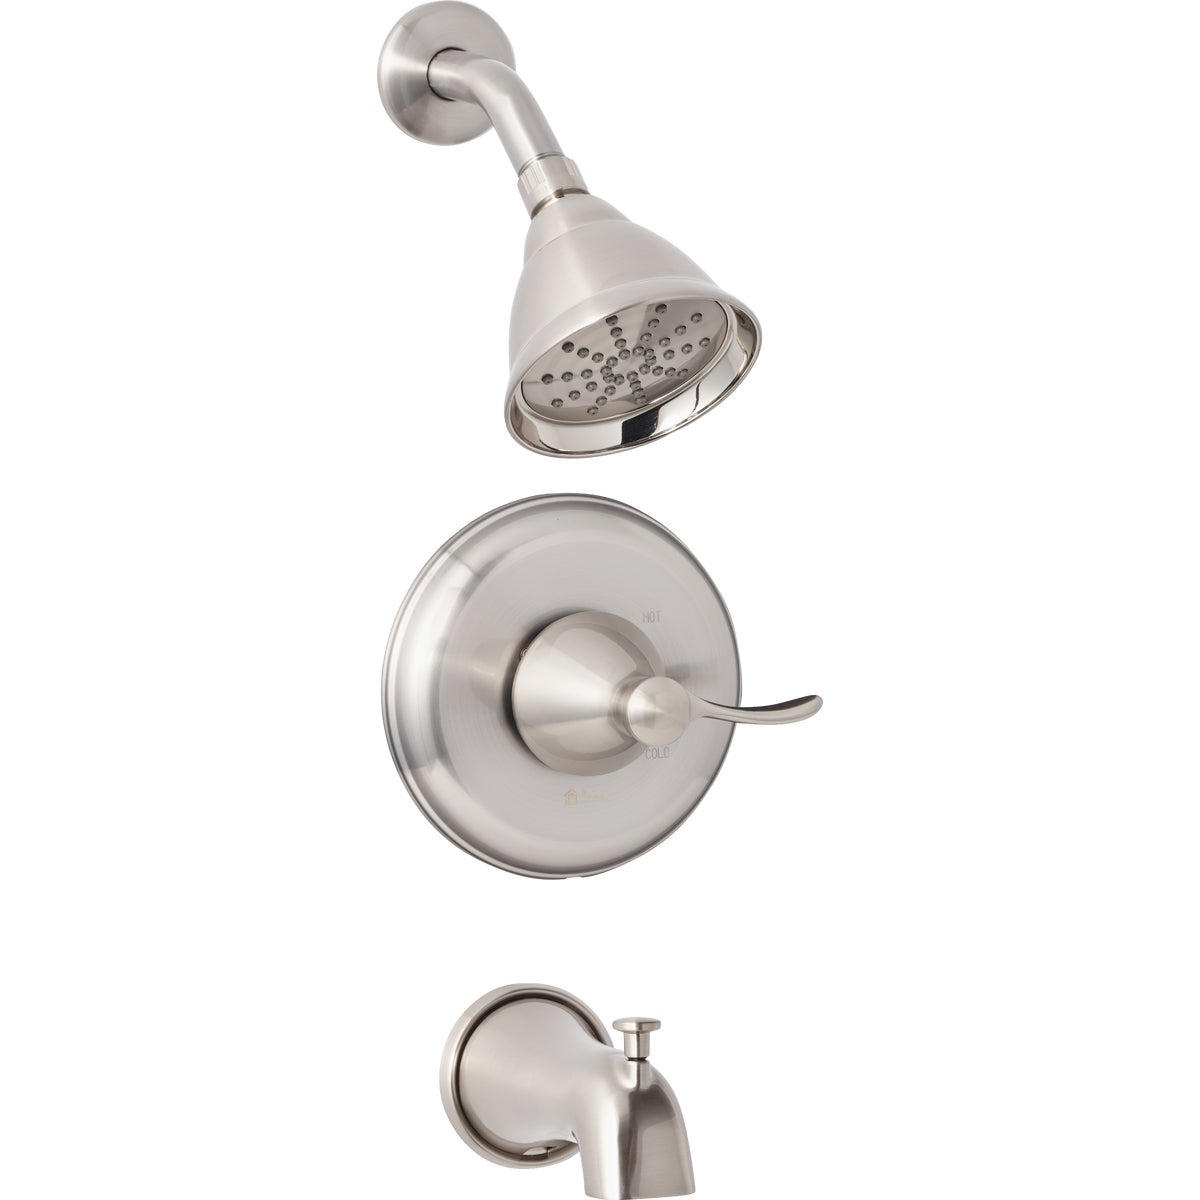 Home Impressions Brushed Nickel Traditional Single-Handle Lever Tub & Shower Faucet